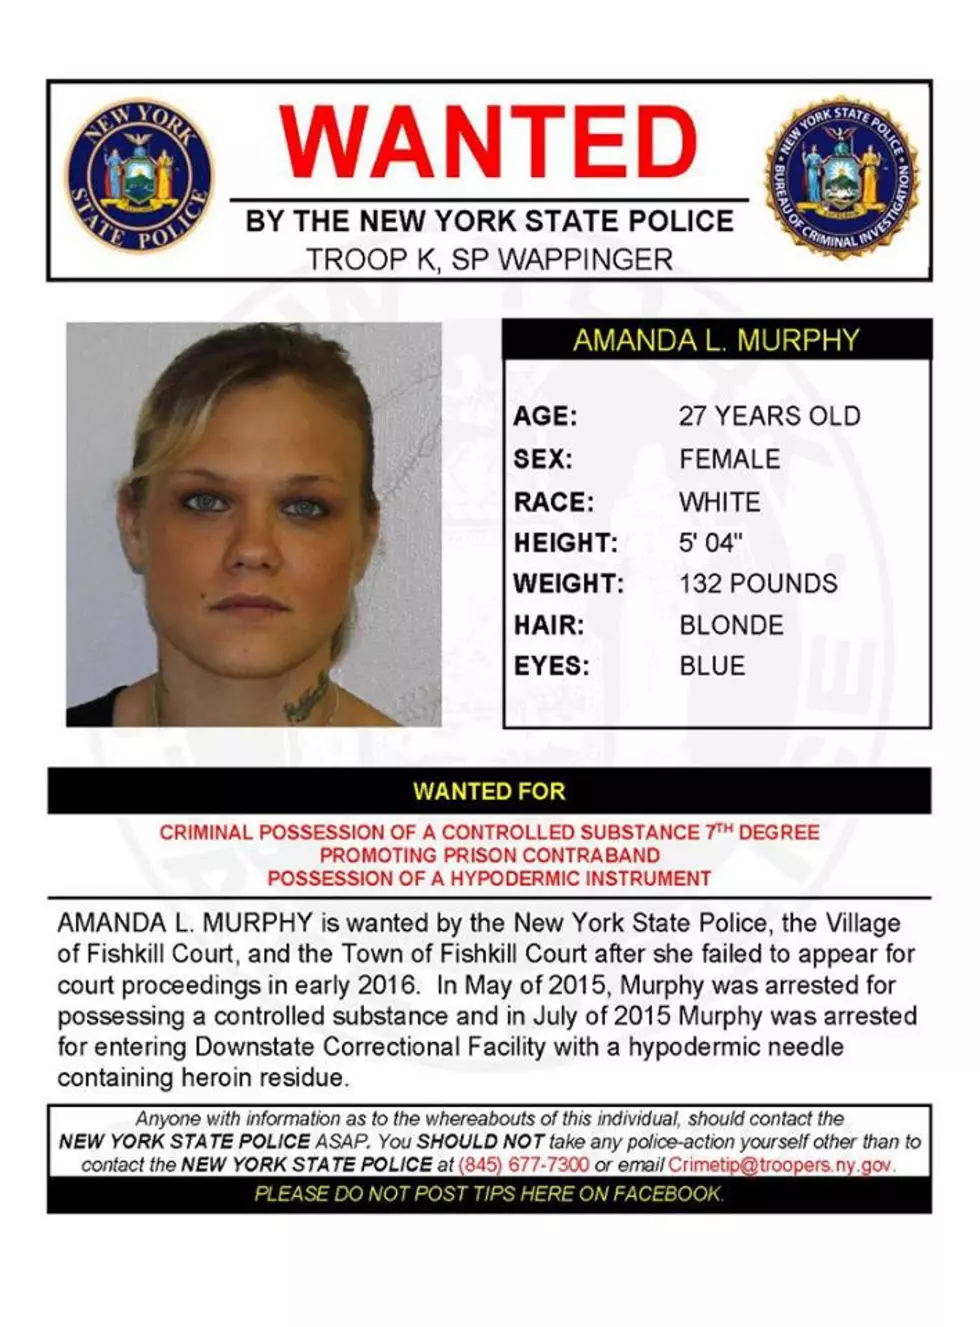 Warrant Wednesday: Dutchess County Woman Wanted For Promoting Prison Contrabrand